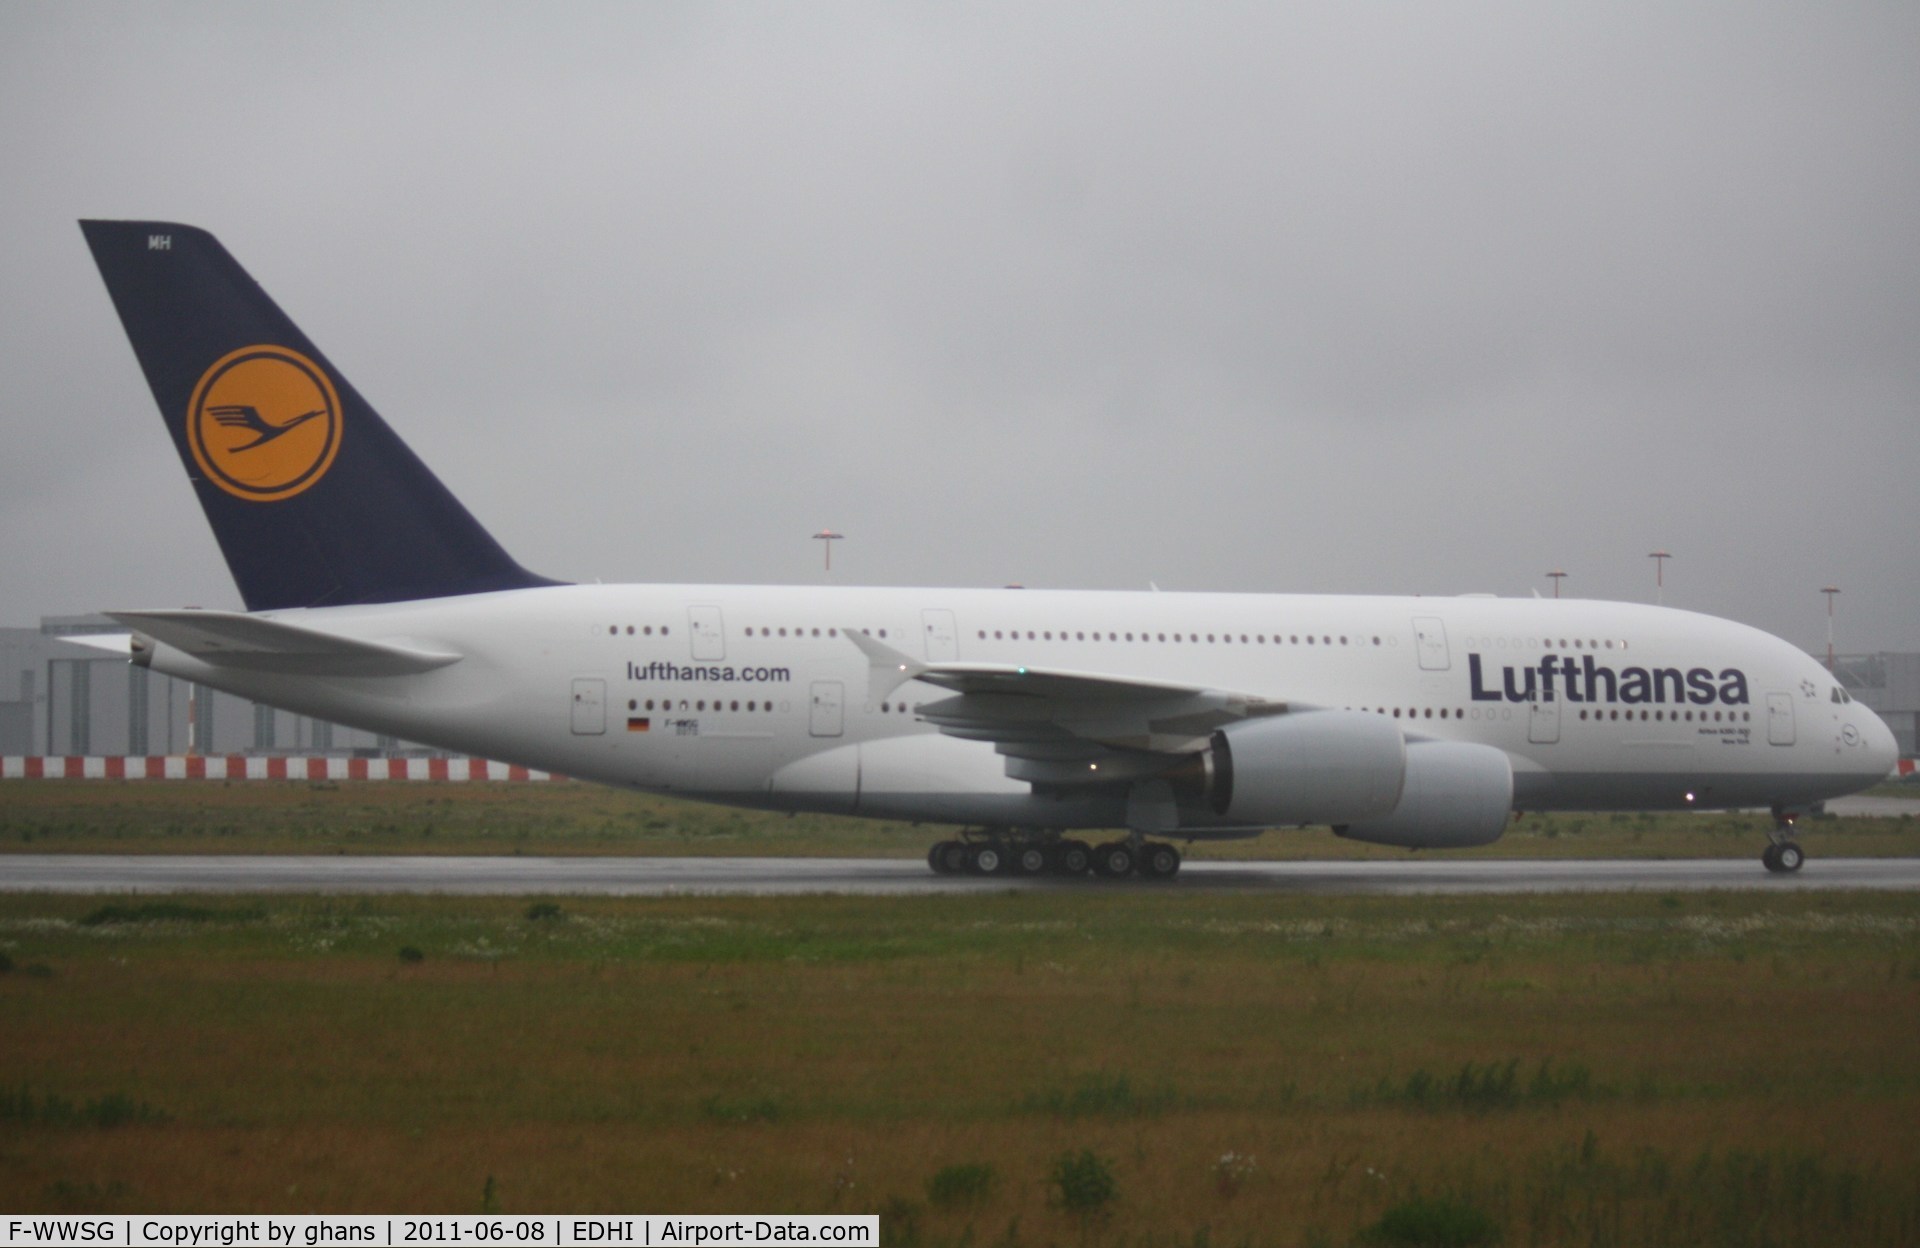 F-WWSG, 2010 Airbus A380-841 C/N 070, to become D-AIMH